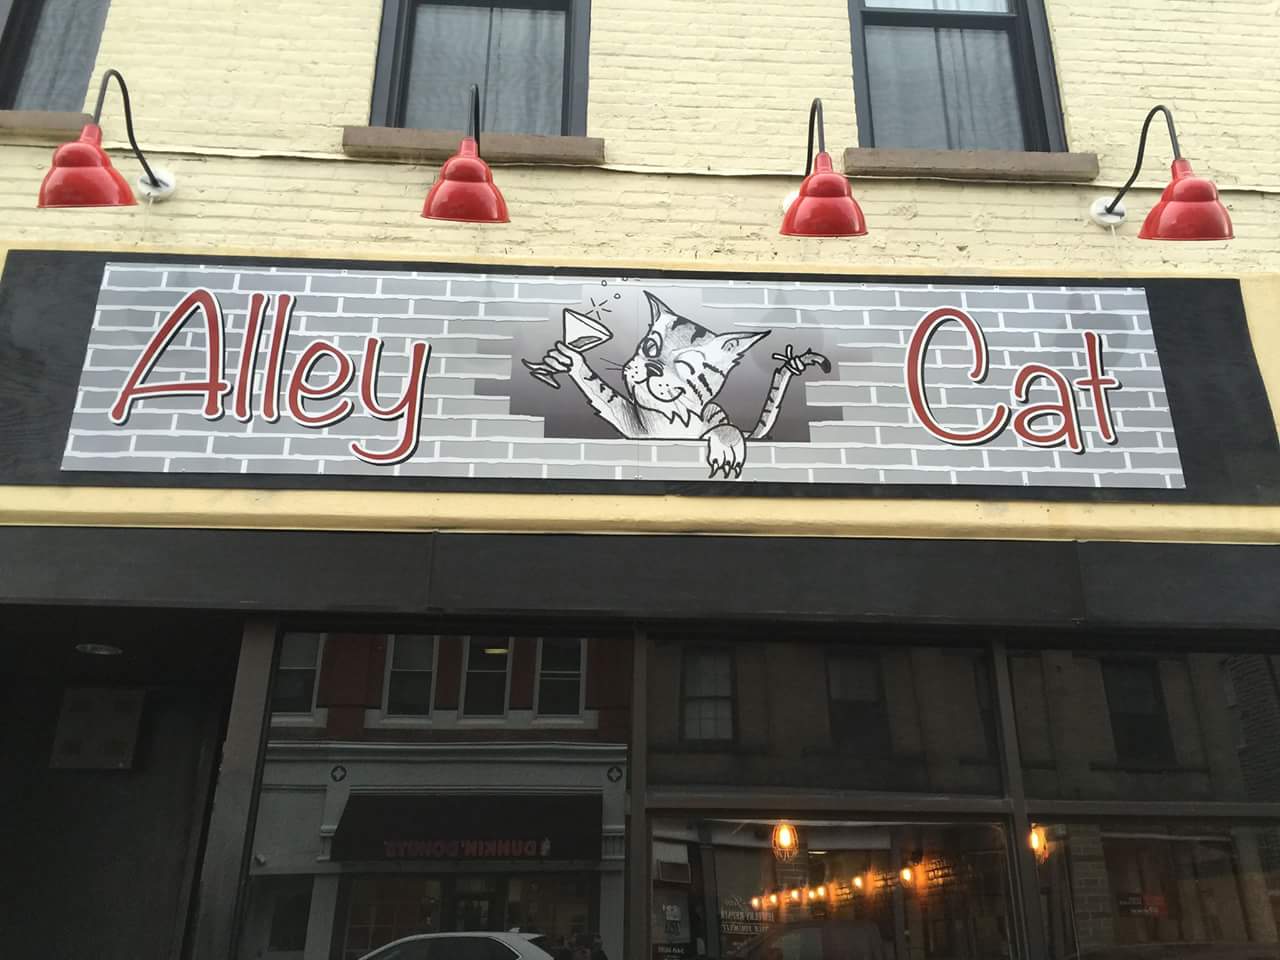 Alley Cat Blues and Jazz Club